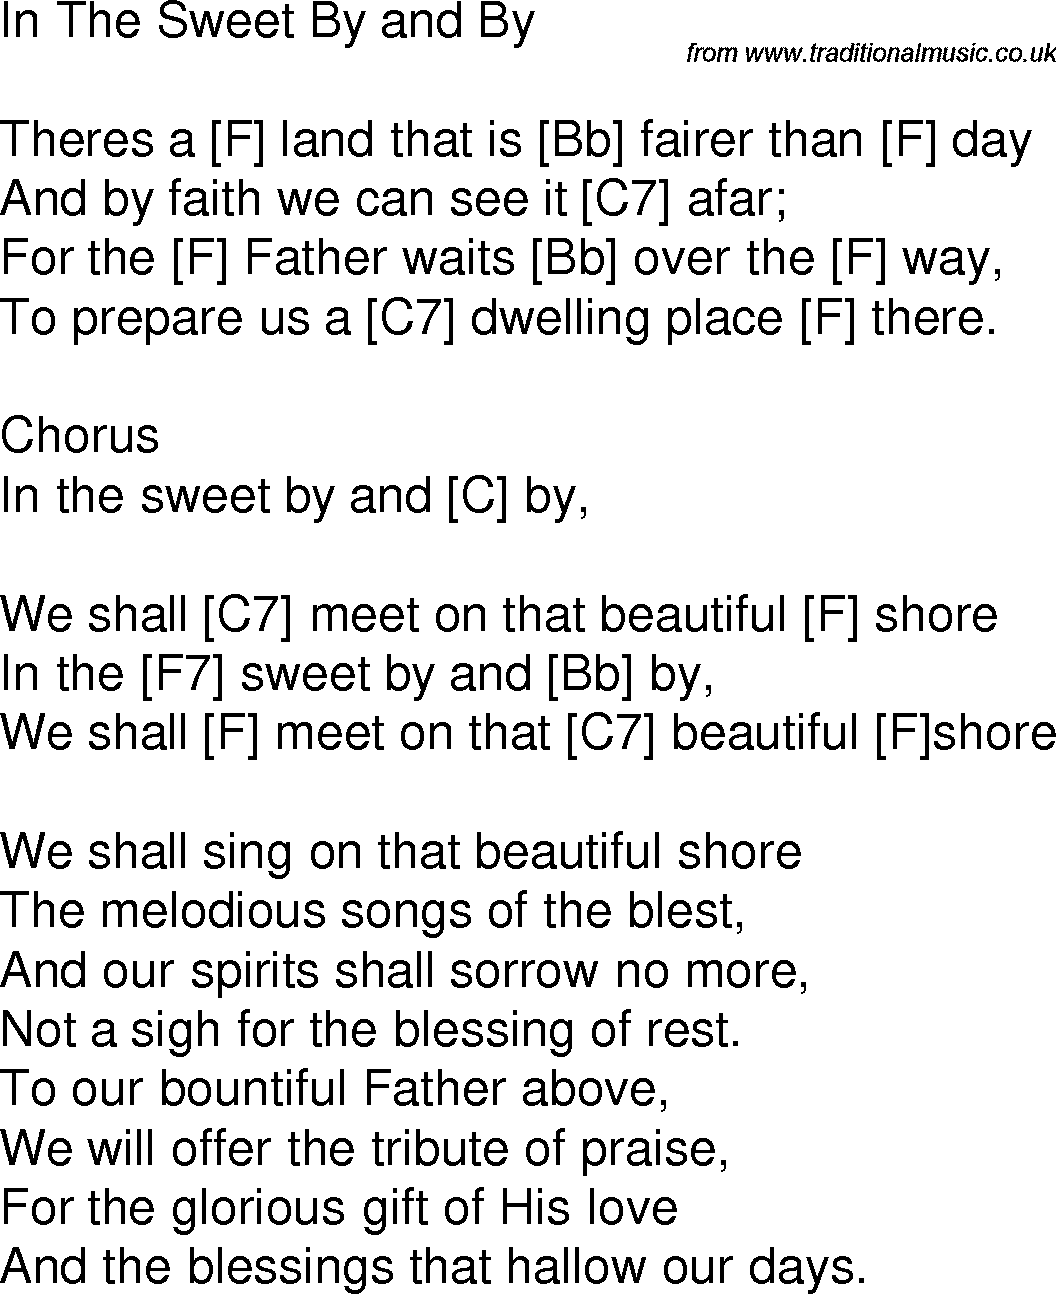 Old time song lyrics with chords for In The Sweet By And By F